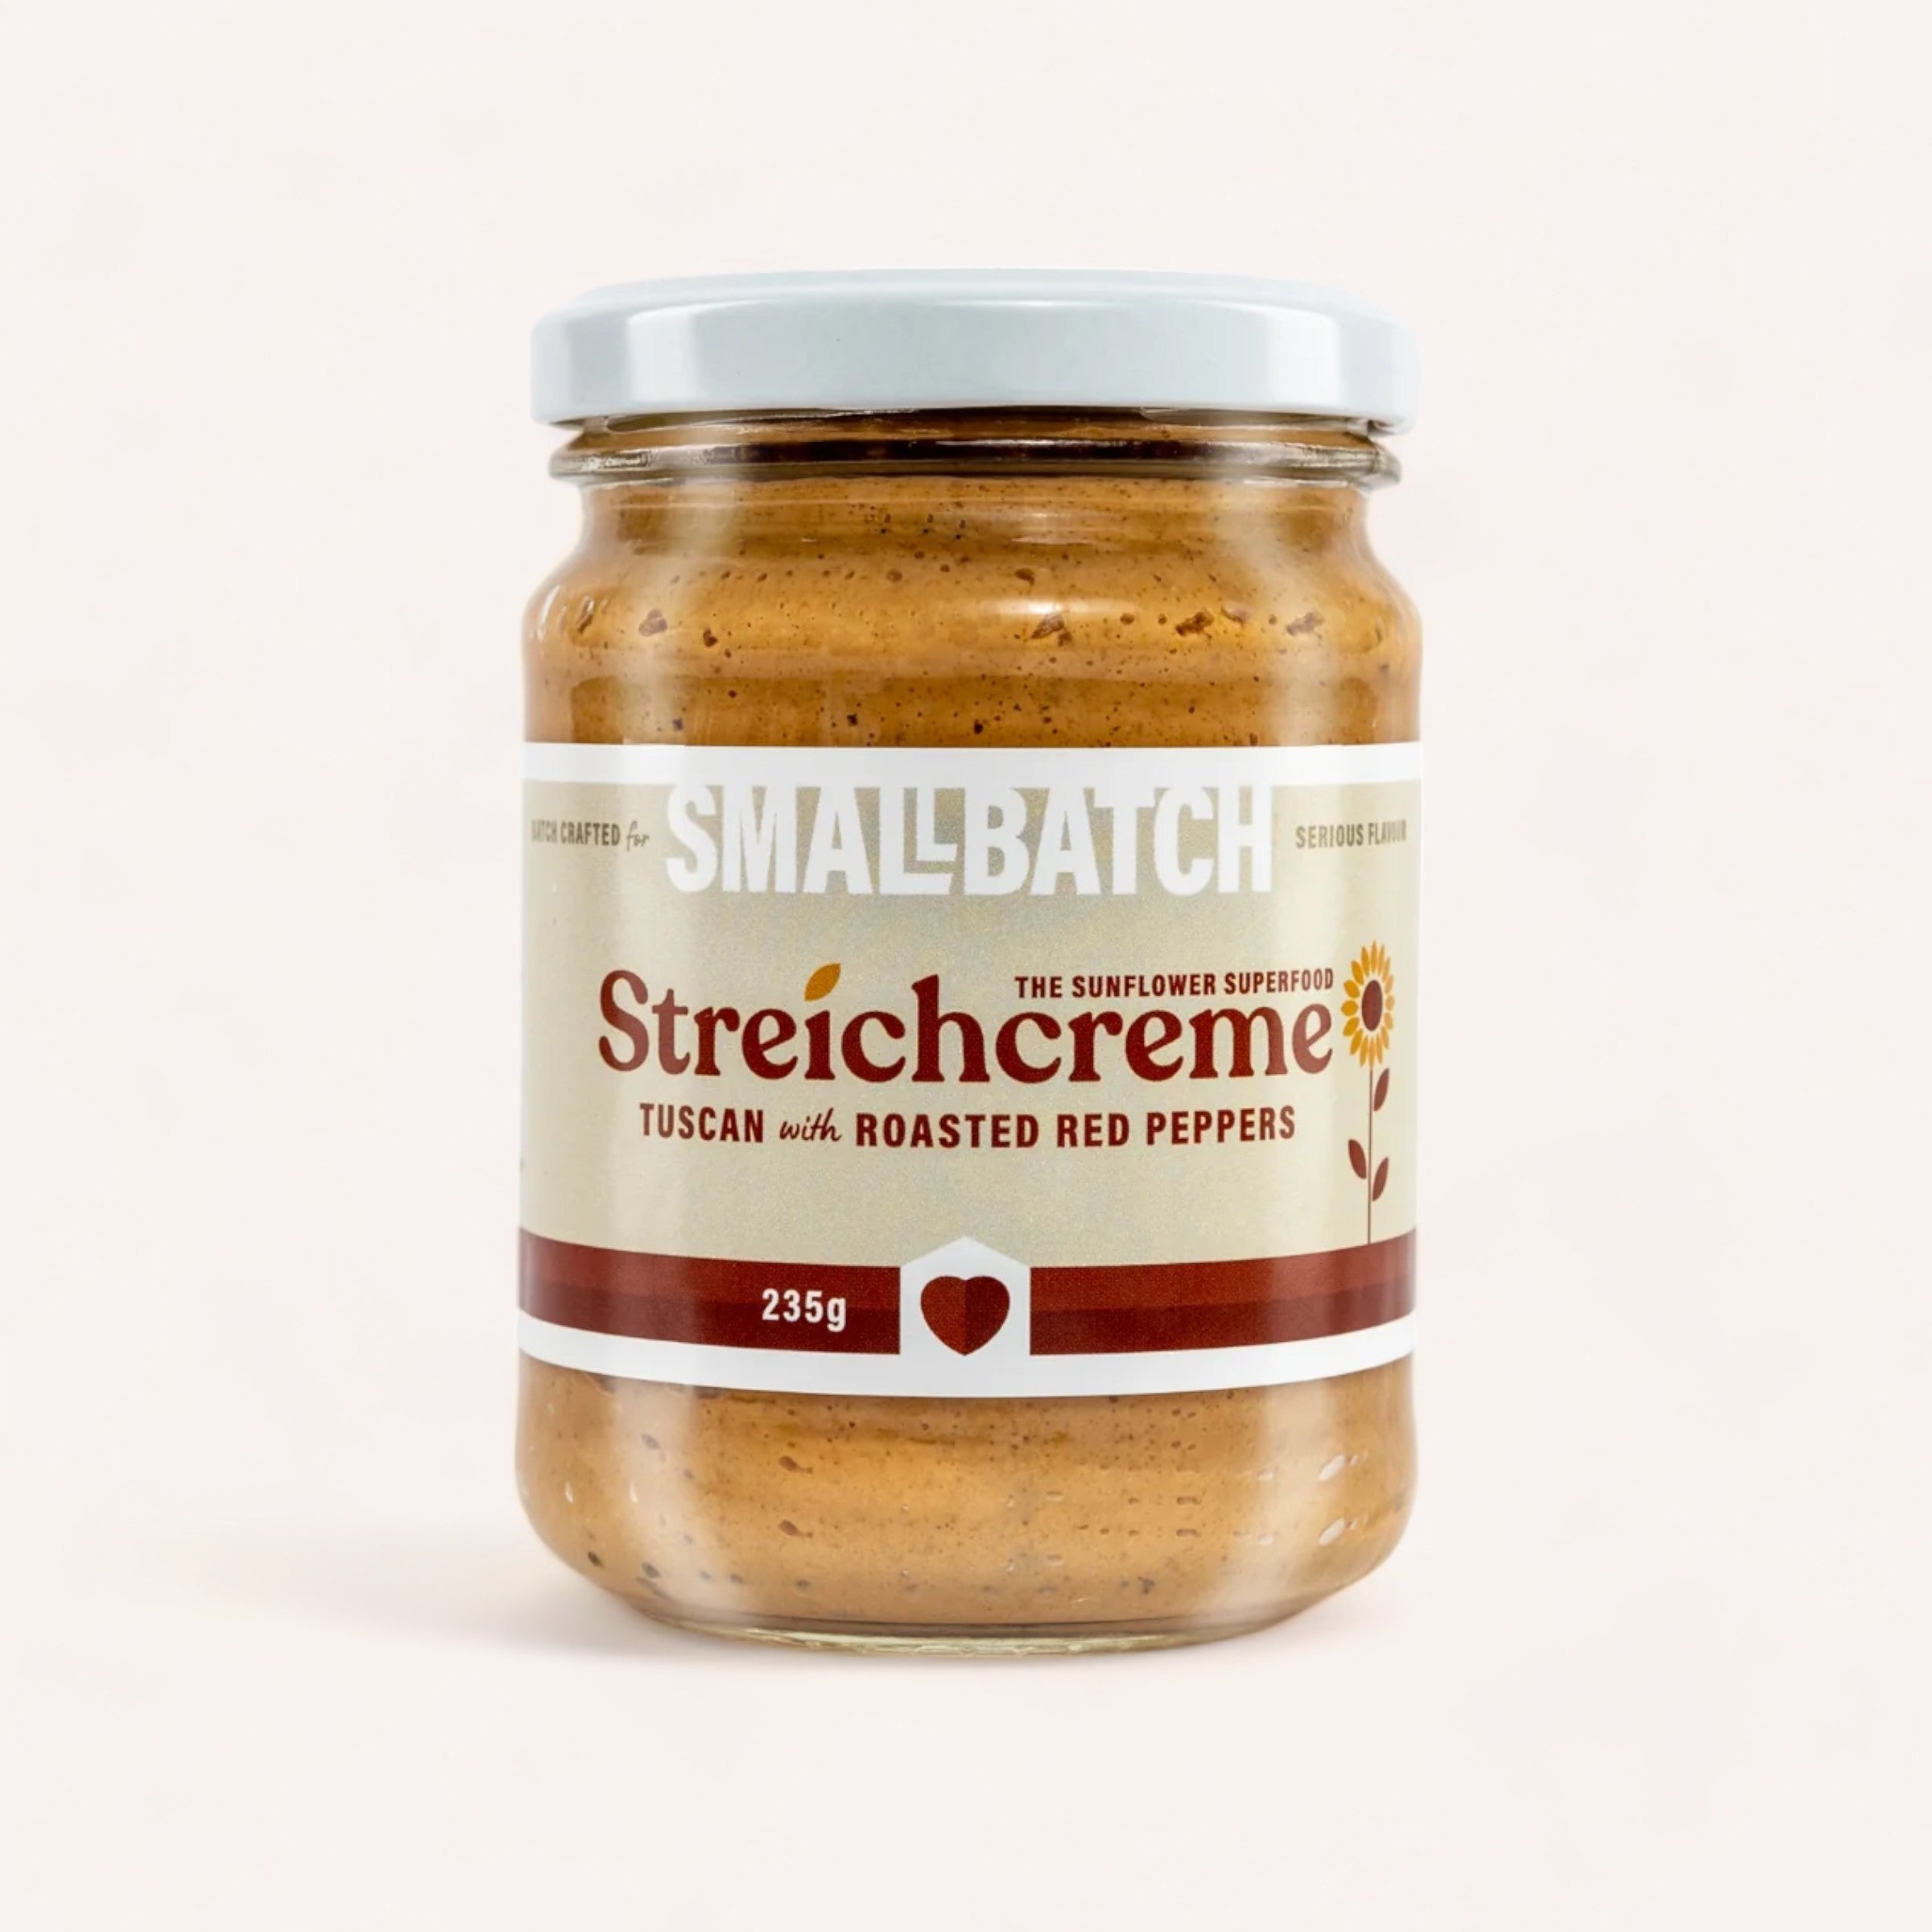 A jar of Smallbatch Tuscan Streichcreme, the sunflower seed-based dip with Tuscan flavor and roasted red peppers, weighing 235 grams.